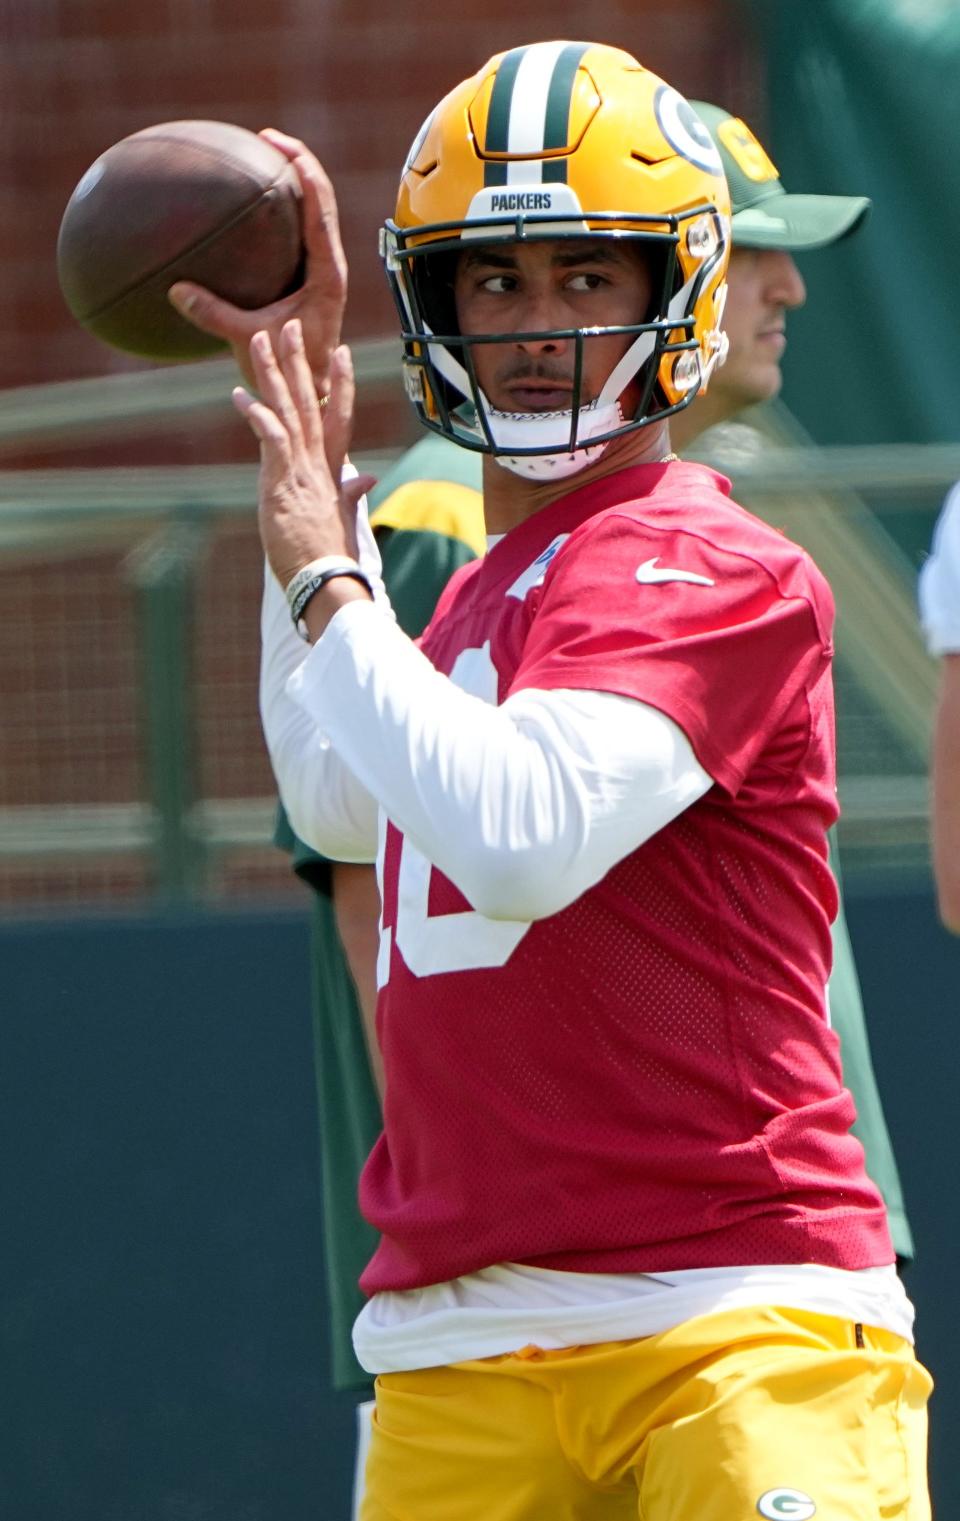 Jordan Love is shown during the Green Bay Packers organized team activities last year. He'll be leading the Packers offense in 2023 as the new starting quarterback.